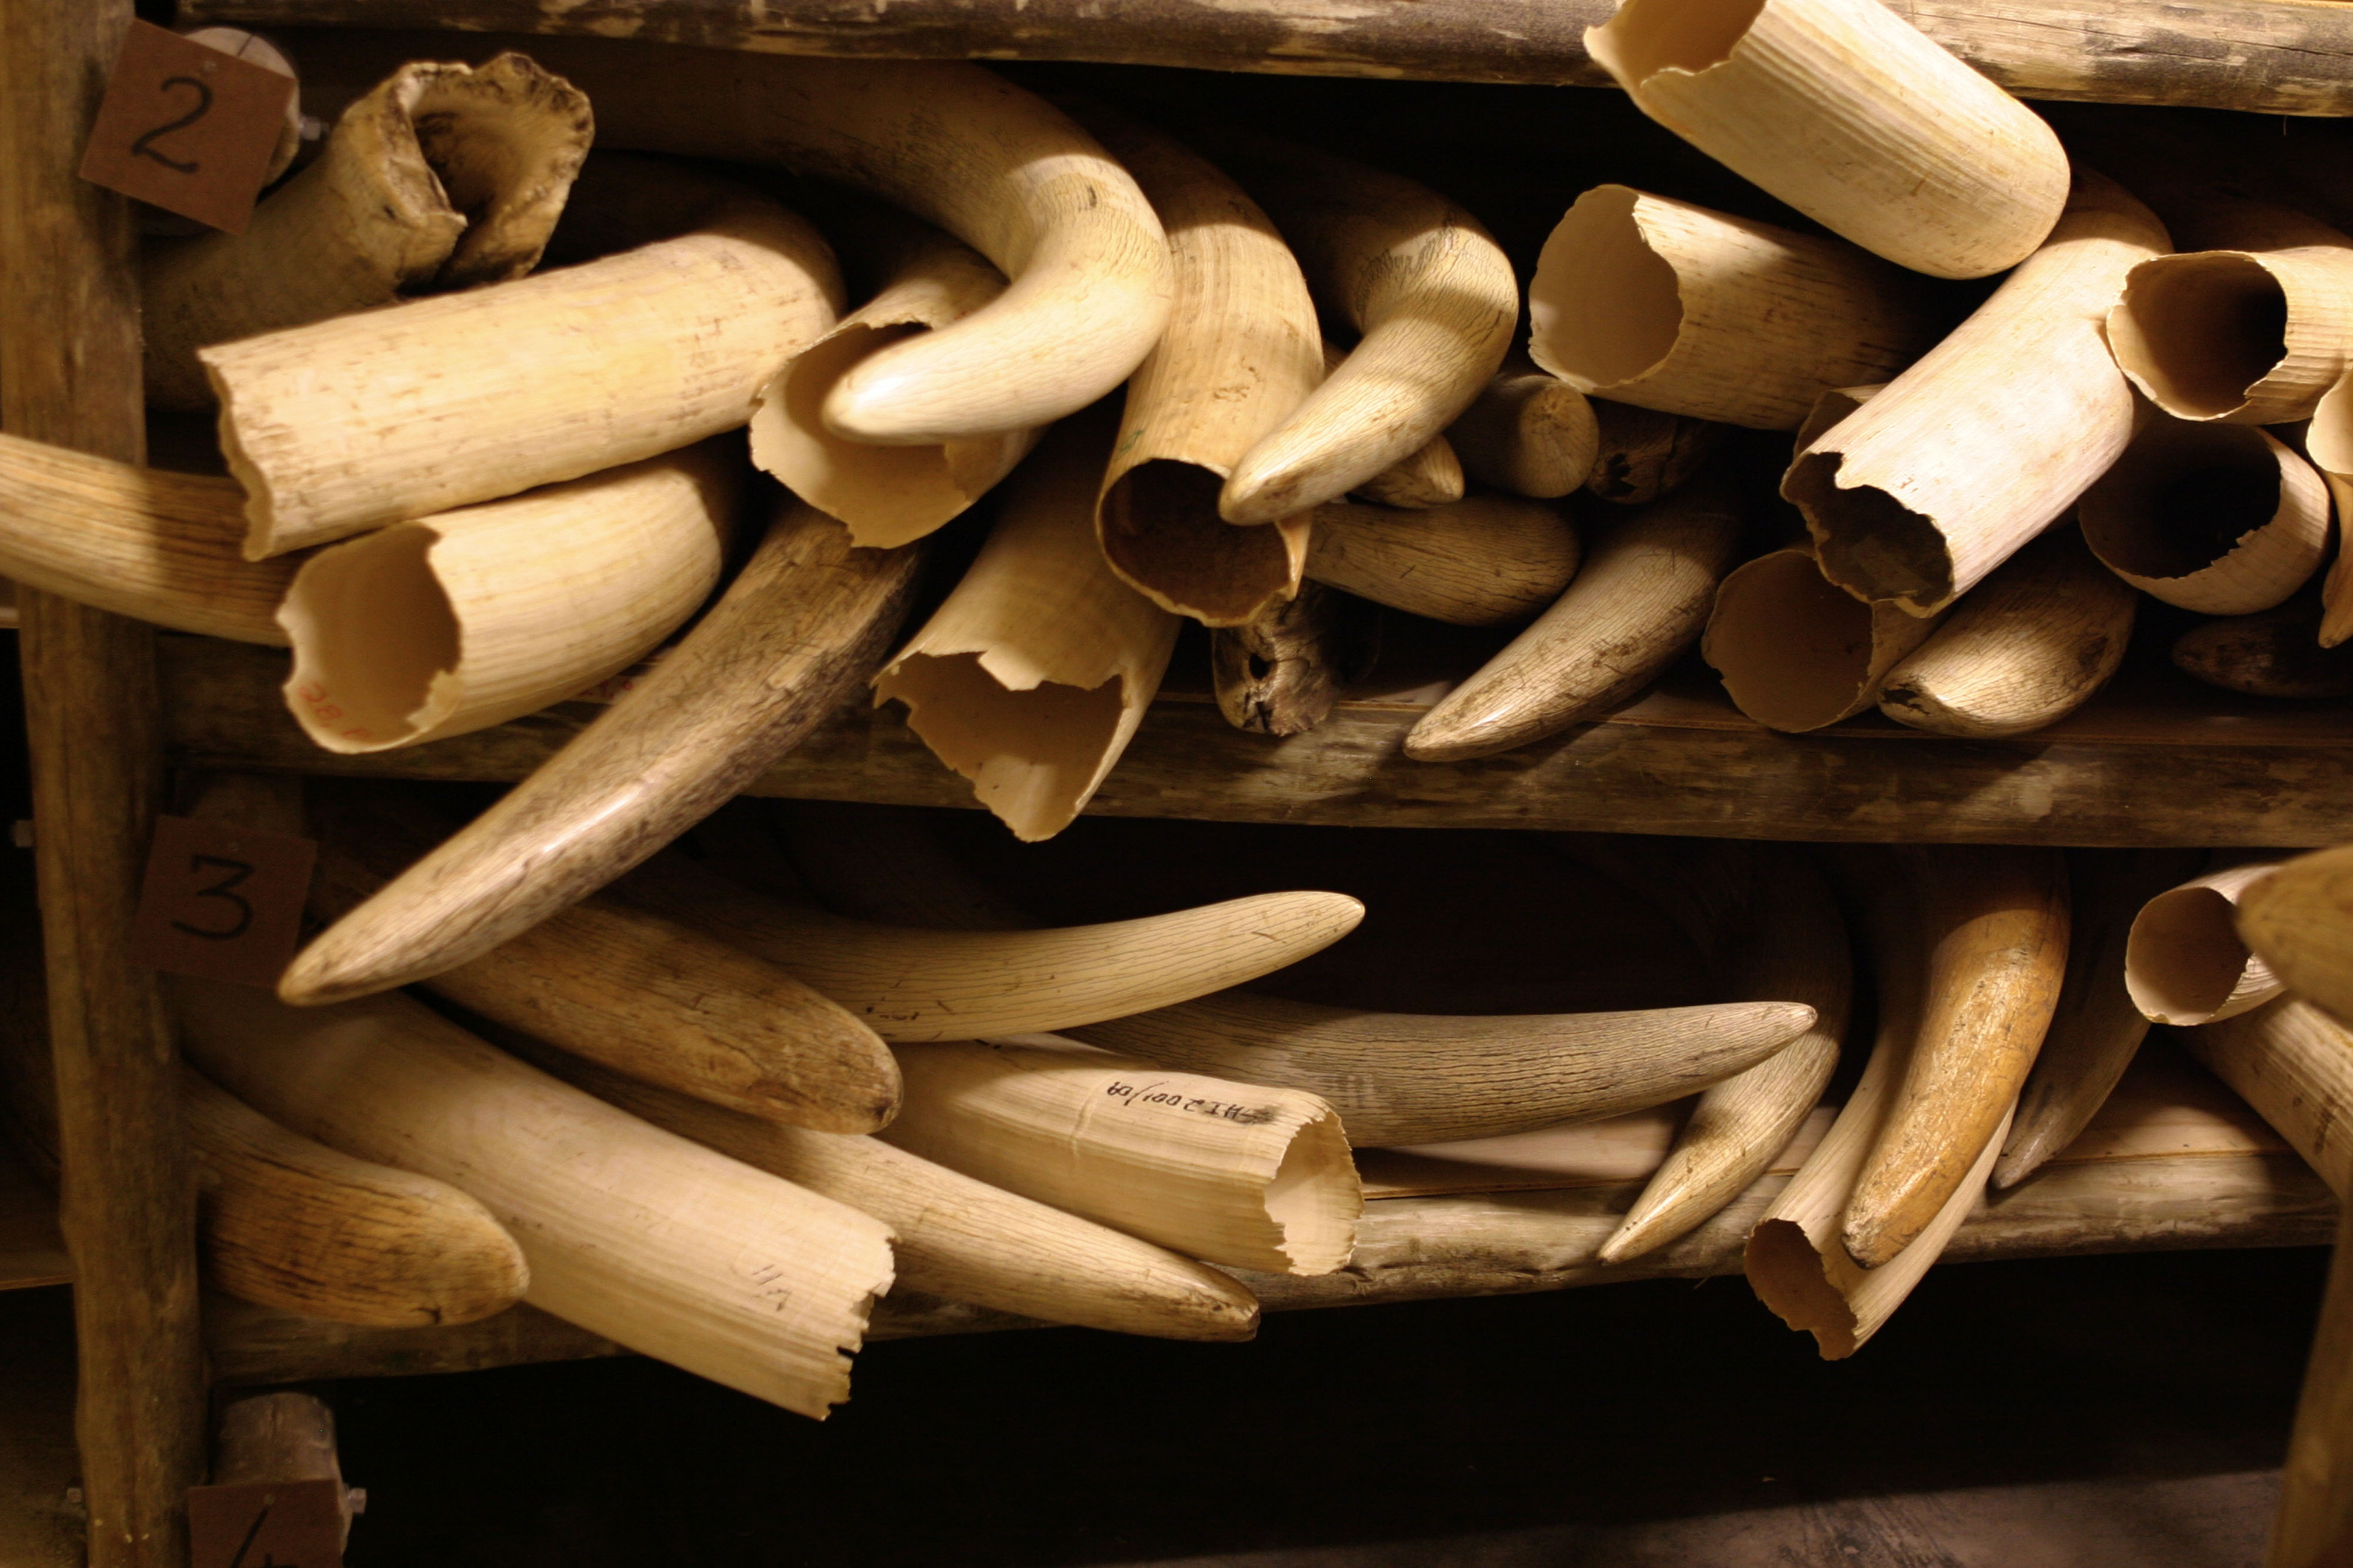 Elephant tusks stored away under extreme security measures in the ivory stock pile of the Kruger National Park, South Africa.